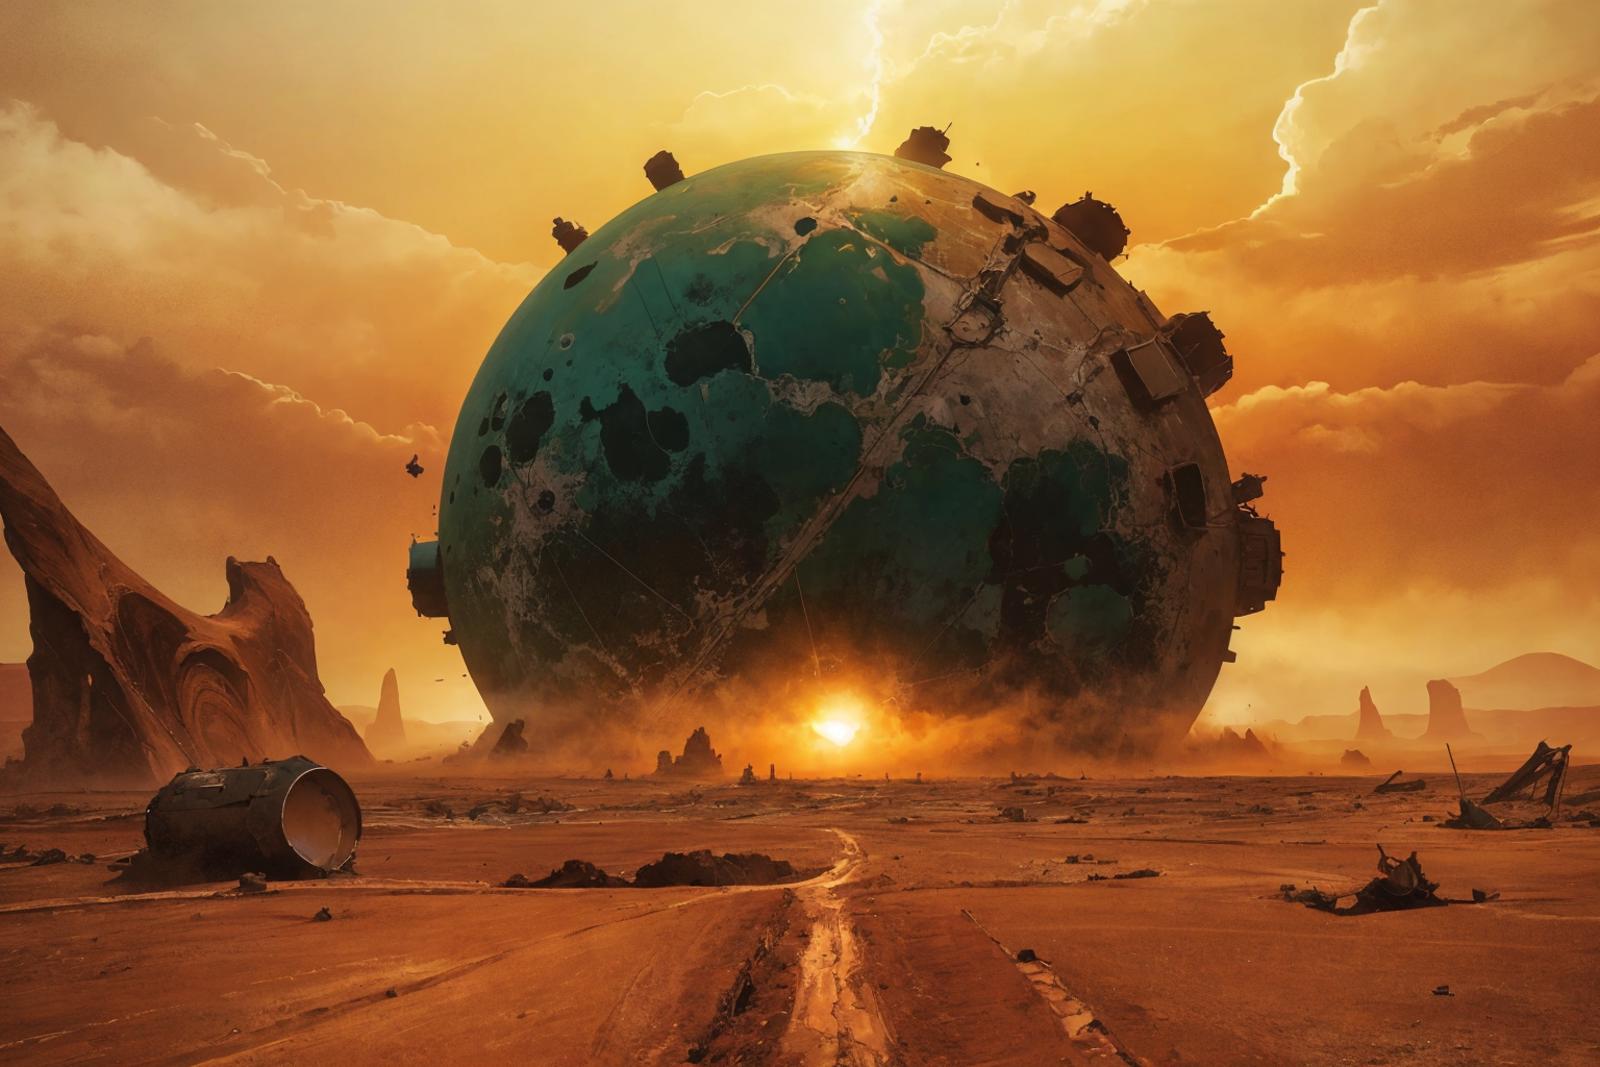 A large, crumbling, green, planet-like structure with a sunset in the background.